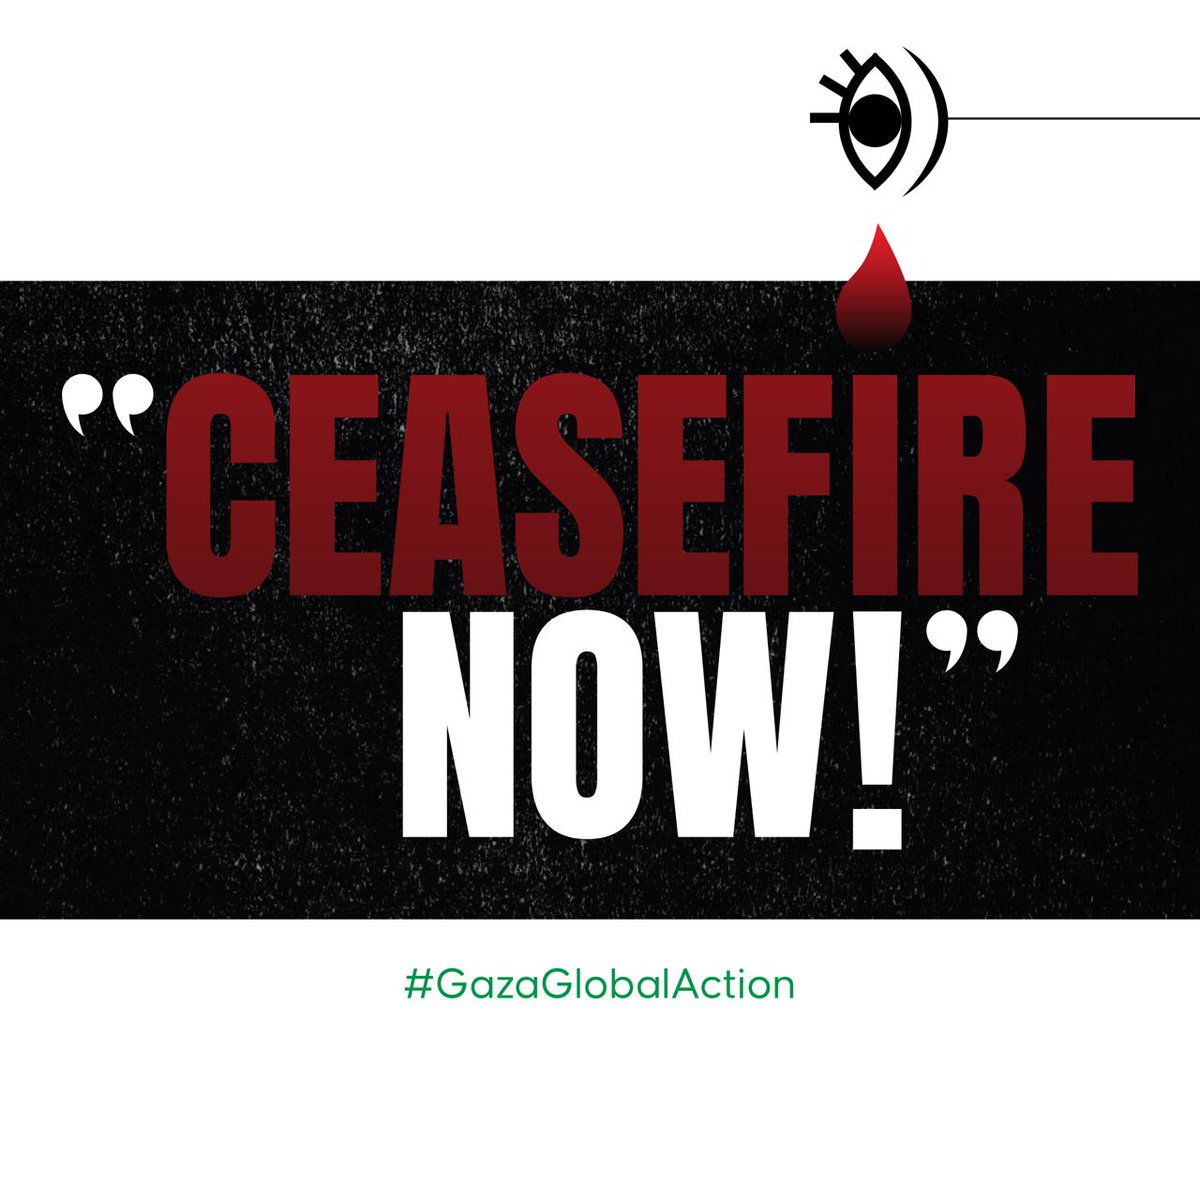 📣 JOIN US ON THE 17 FEBRUARY FOR THE GLOBAL DAY OF ACTION 📣

We will be protesting in our millions, to call for an immediate and permanent ceasefire in #Gaza

#countdown2ceasefire 
#GazaGlobalAction